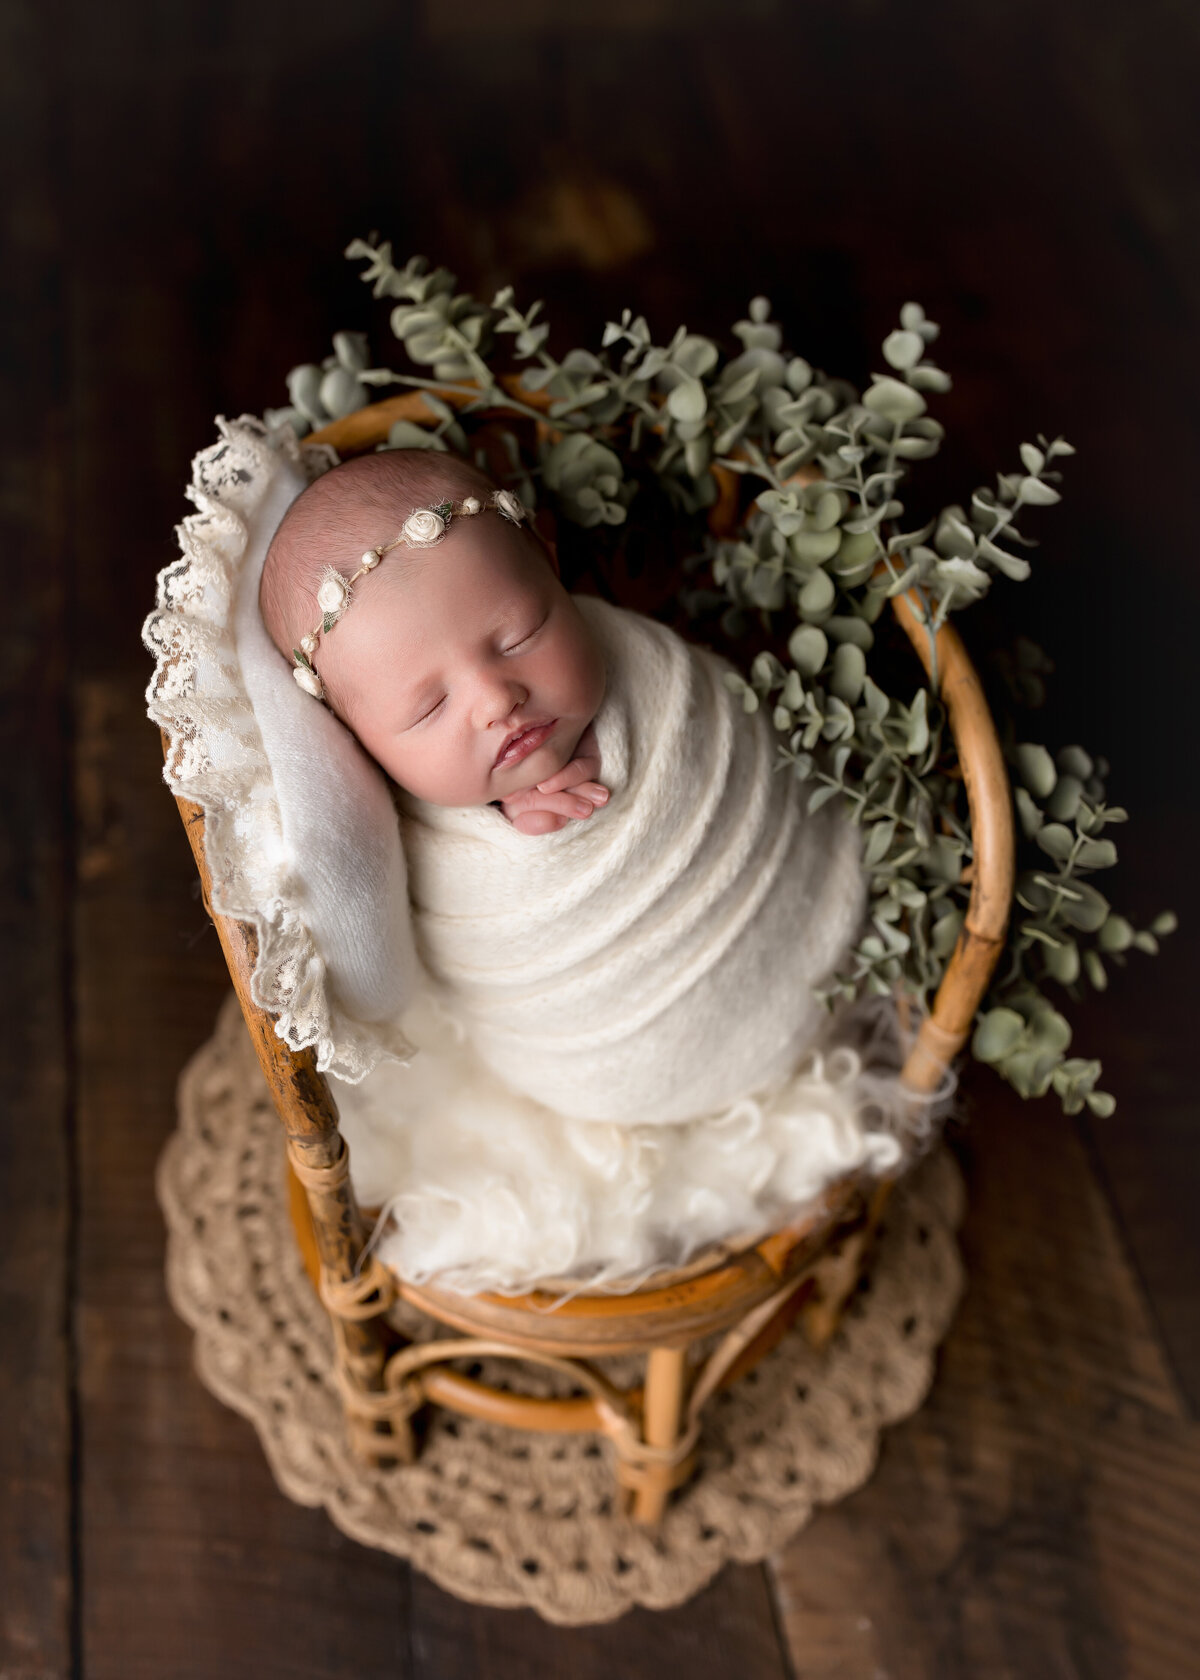 Baby girl sleeping in wicker chair for newborn photoshoot. Baby is wrapped in a cream knit swaddle with a delicate floral headband. Her head is resting on a cream colored lace pillow. Eucalyptus is woven in the chair.